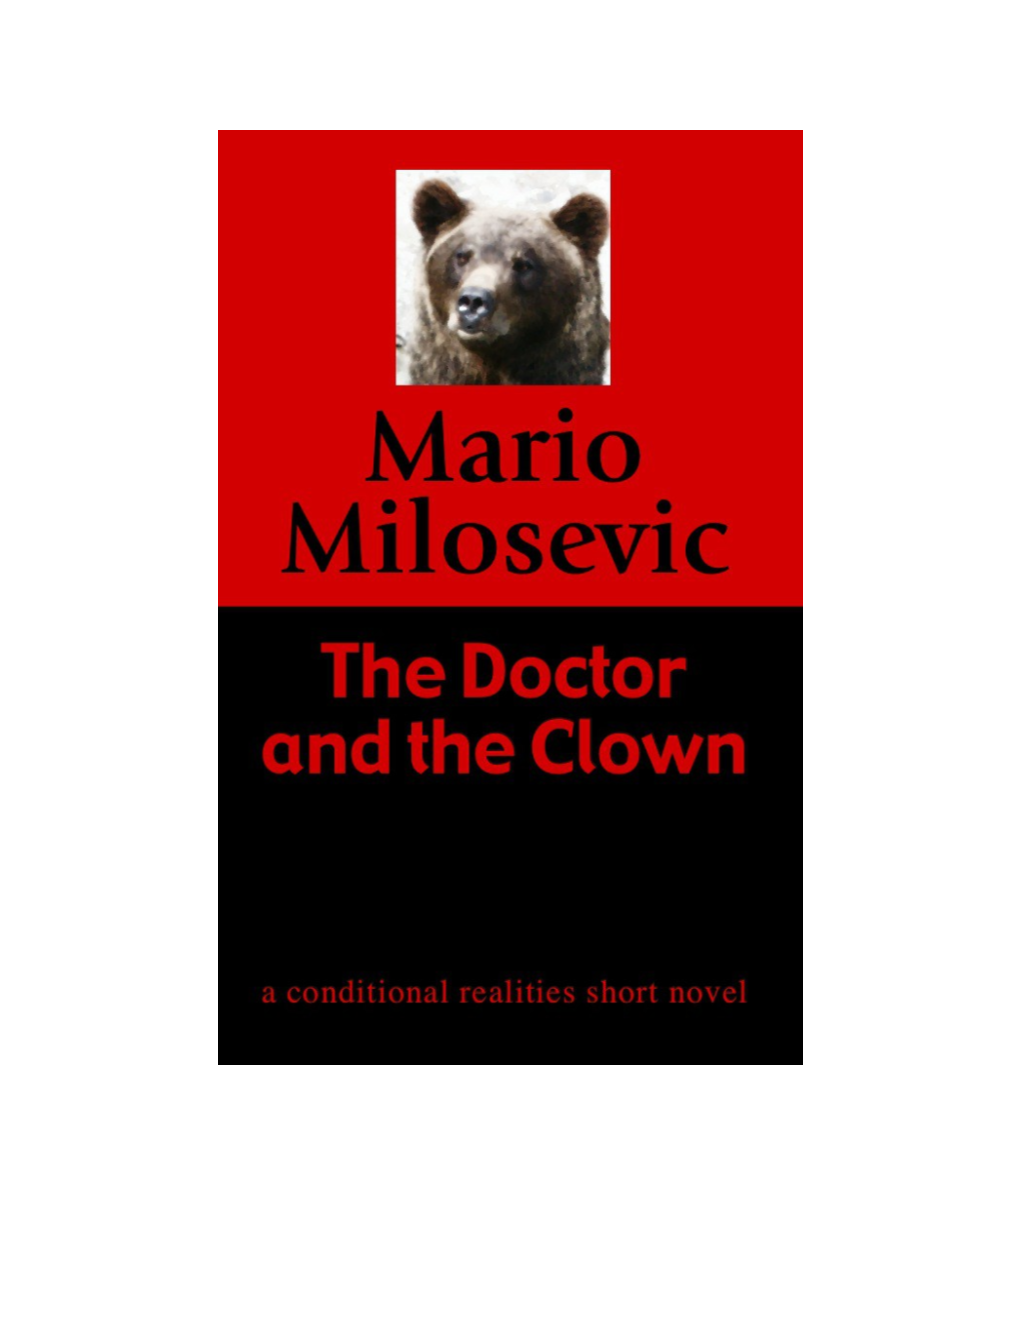 Other Books by Mario Milosevic